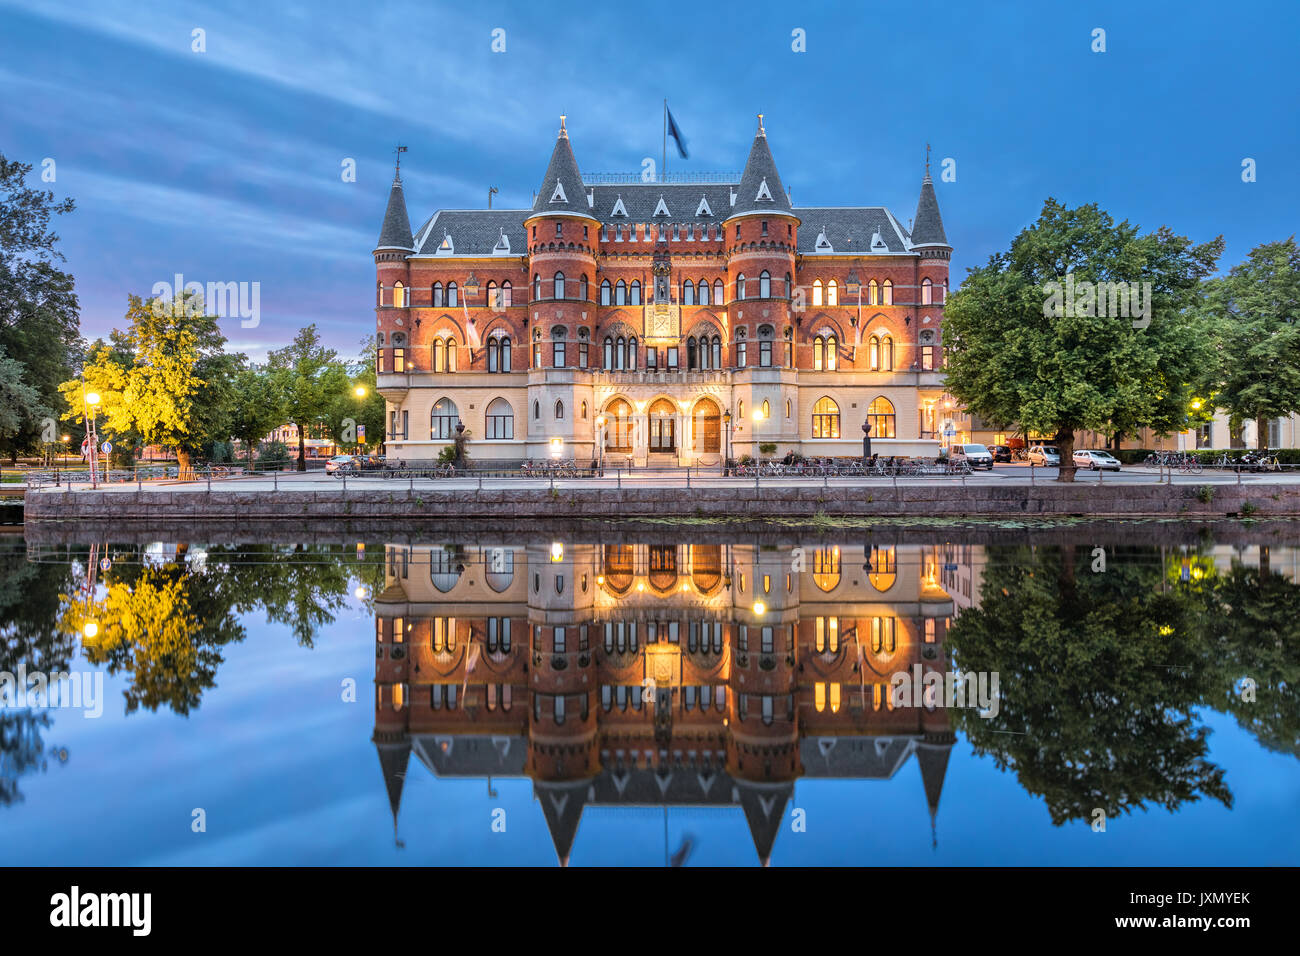 Orebro city in Sweden. Beautiful old building from 19th century in the evening, architectural landmark located on the embankment of Svartan river. Stock Photo